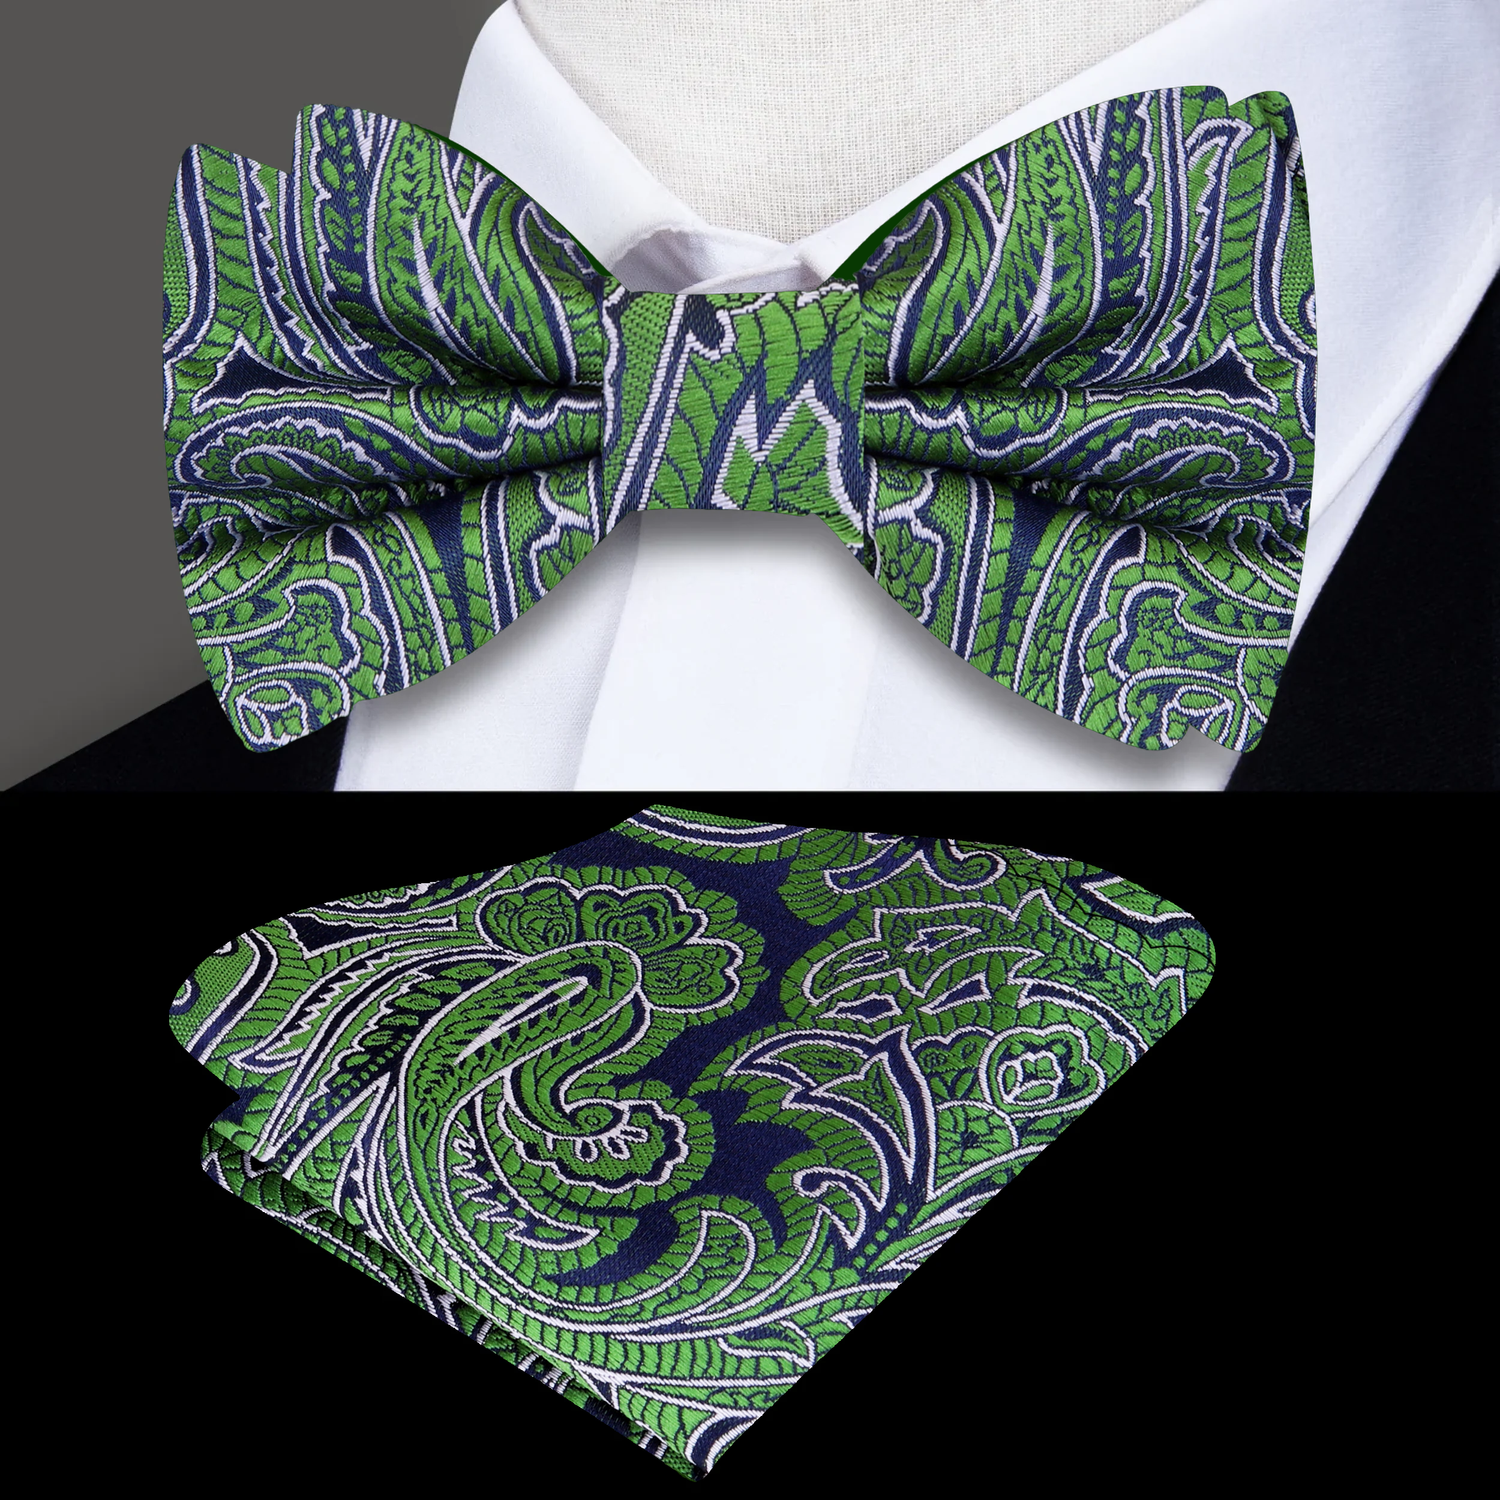 Main: A Blue, Green Intricate Floral and Paisley Pattern Silk Self Tie Bow Tie, Matching Pocket Square